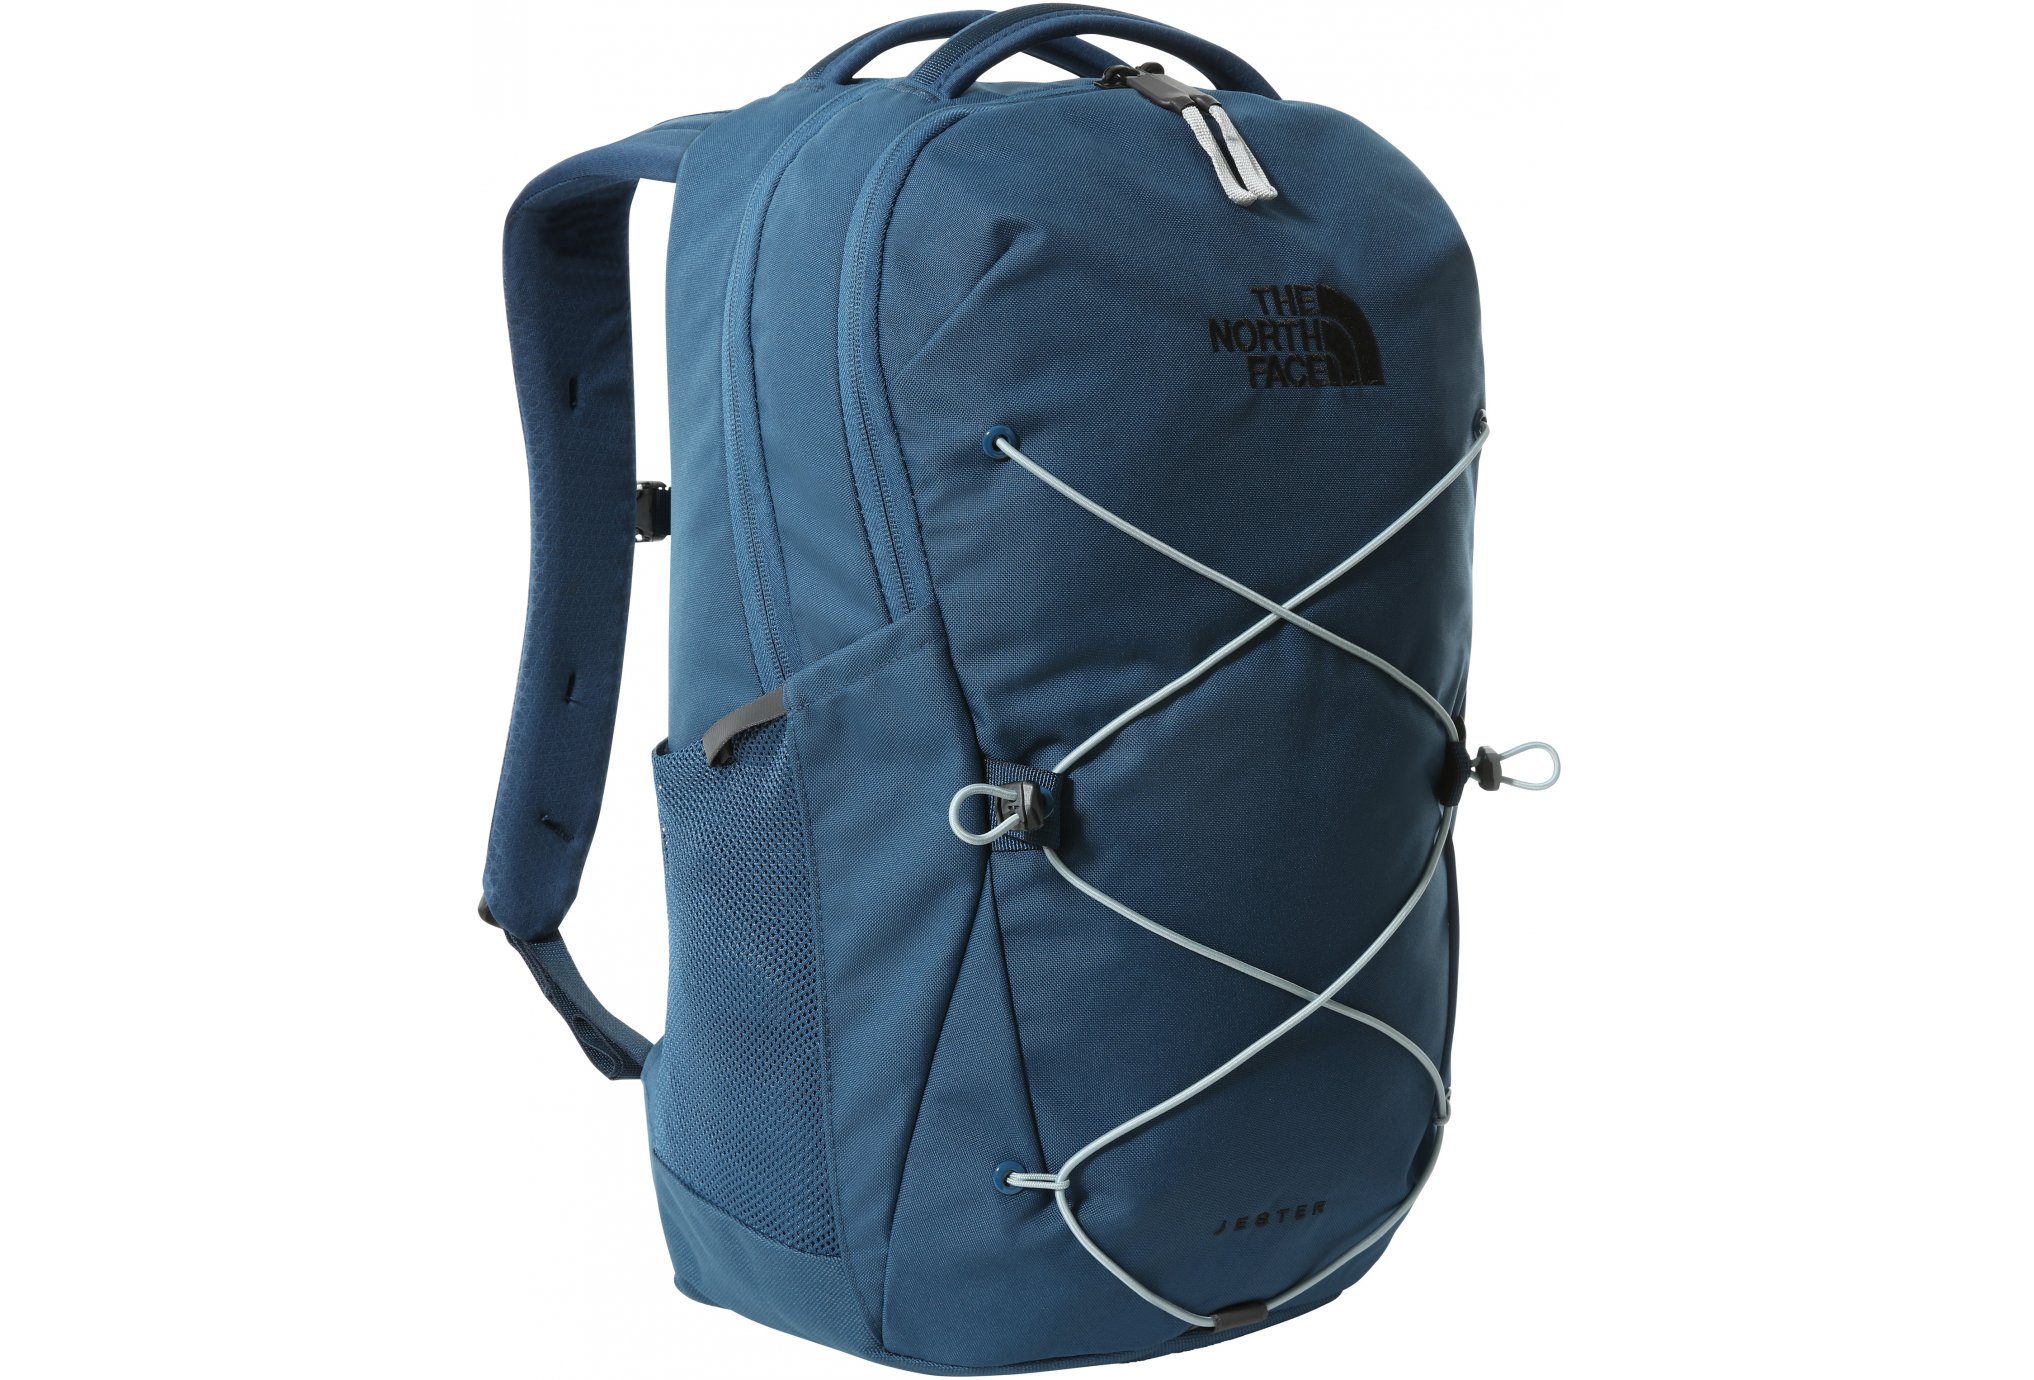 The North Face Jester Sac à dos